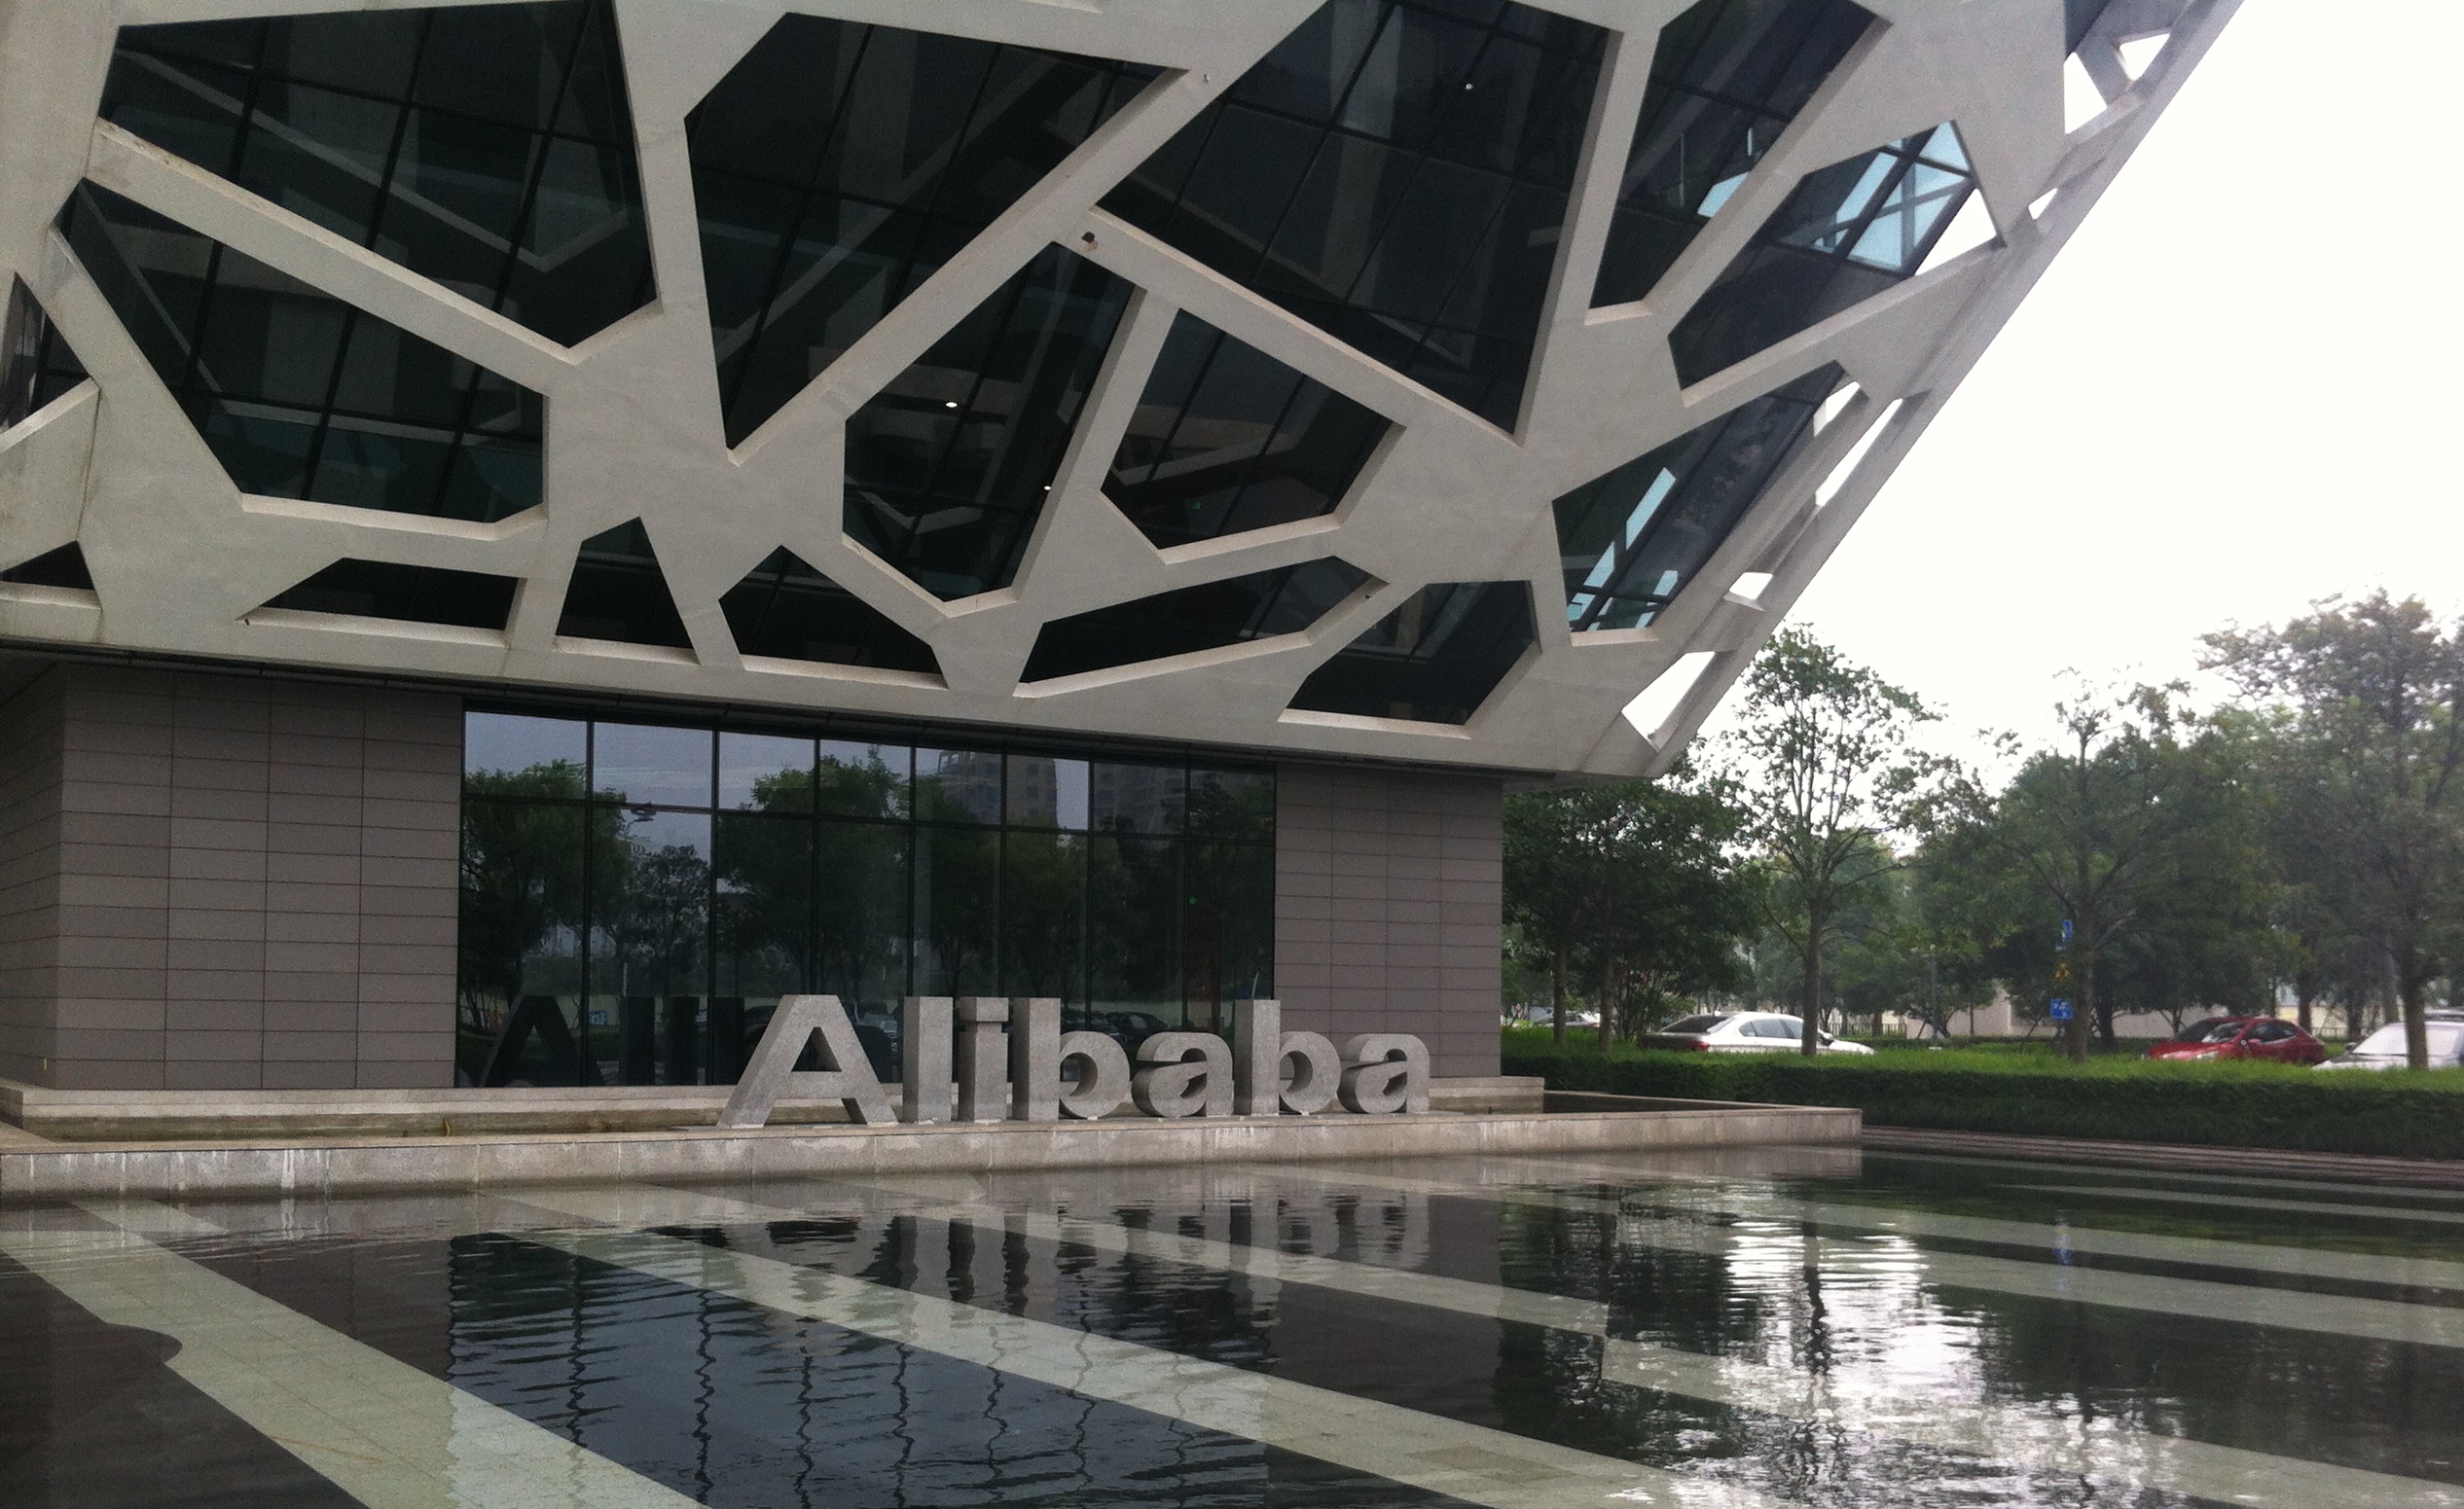 How to find suppliers beyond Alibaba Part THREE: Online, Offline, and Thinking outside the box